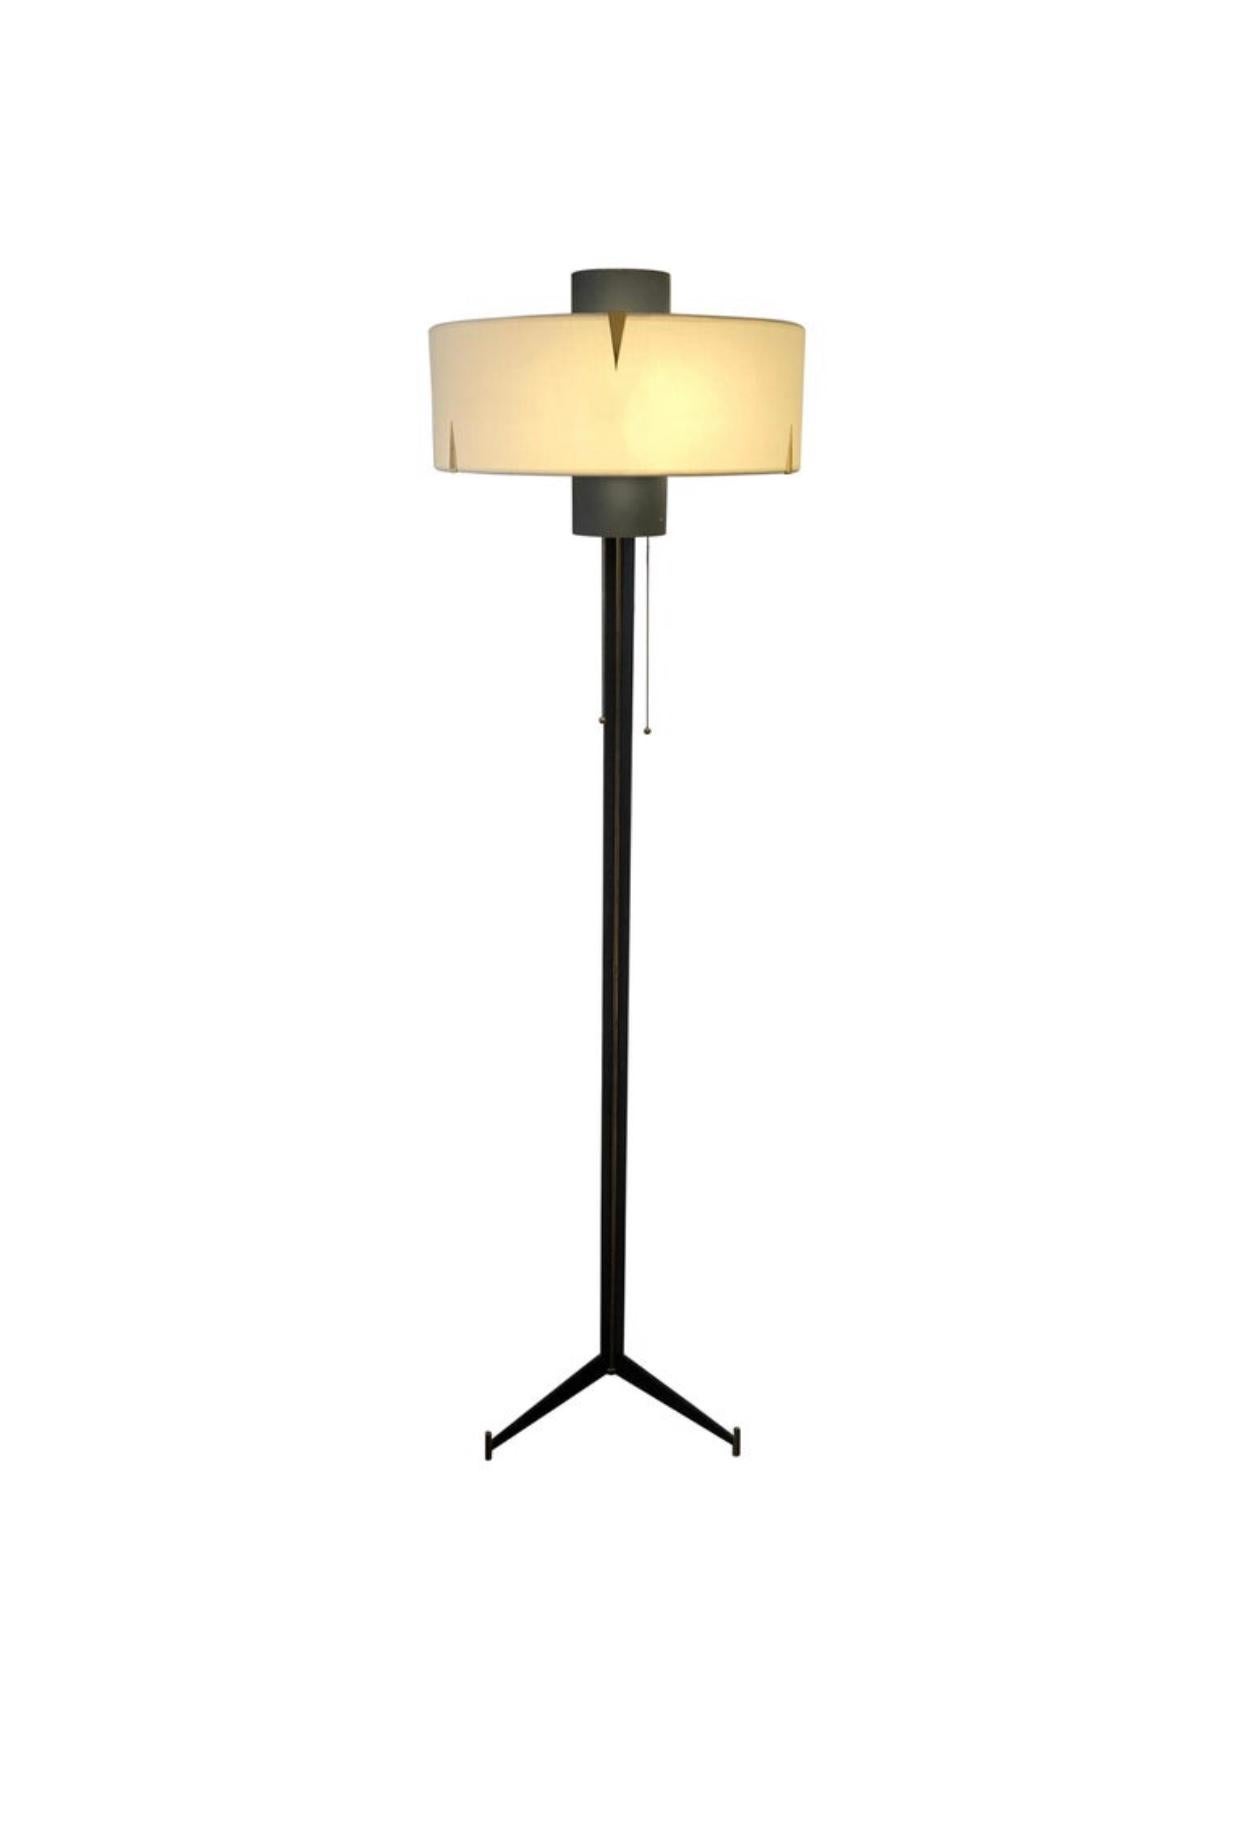 Pair of floor lamps by Maison Arlus
From 1950
Brass and black lacquered metal
Glass.